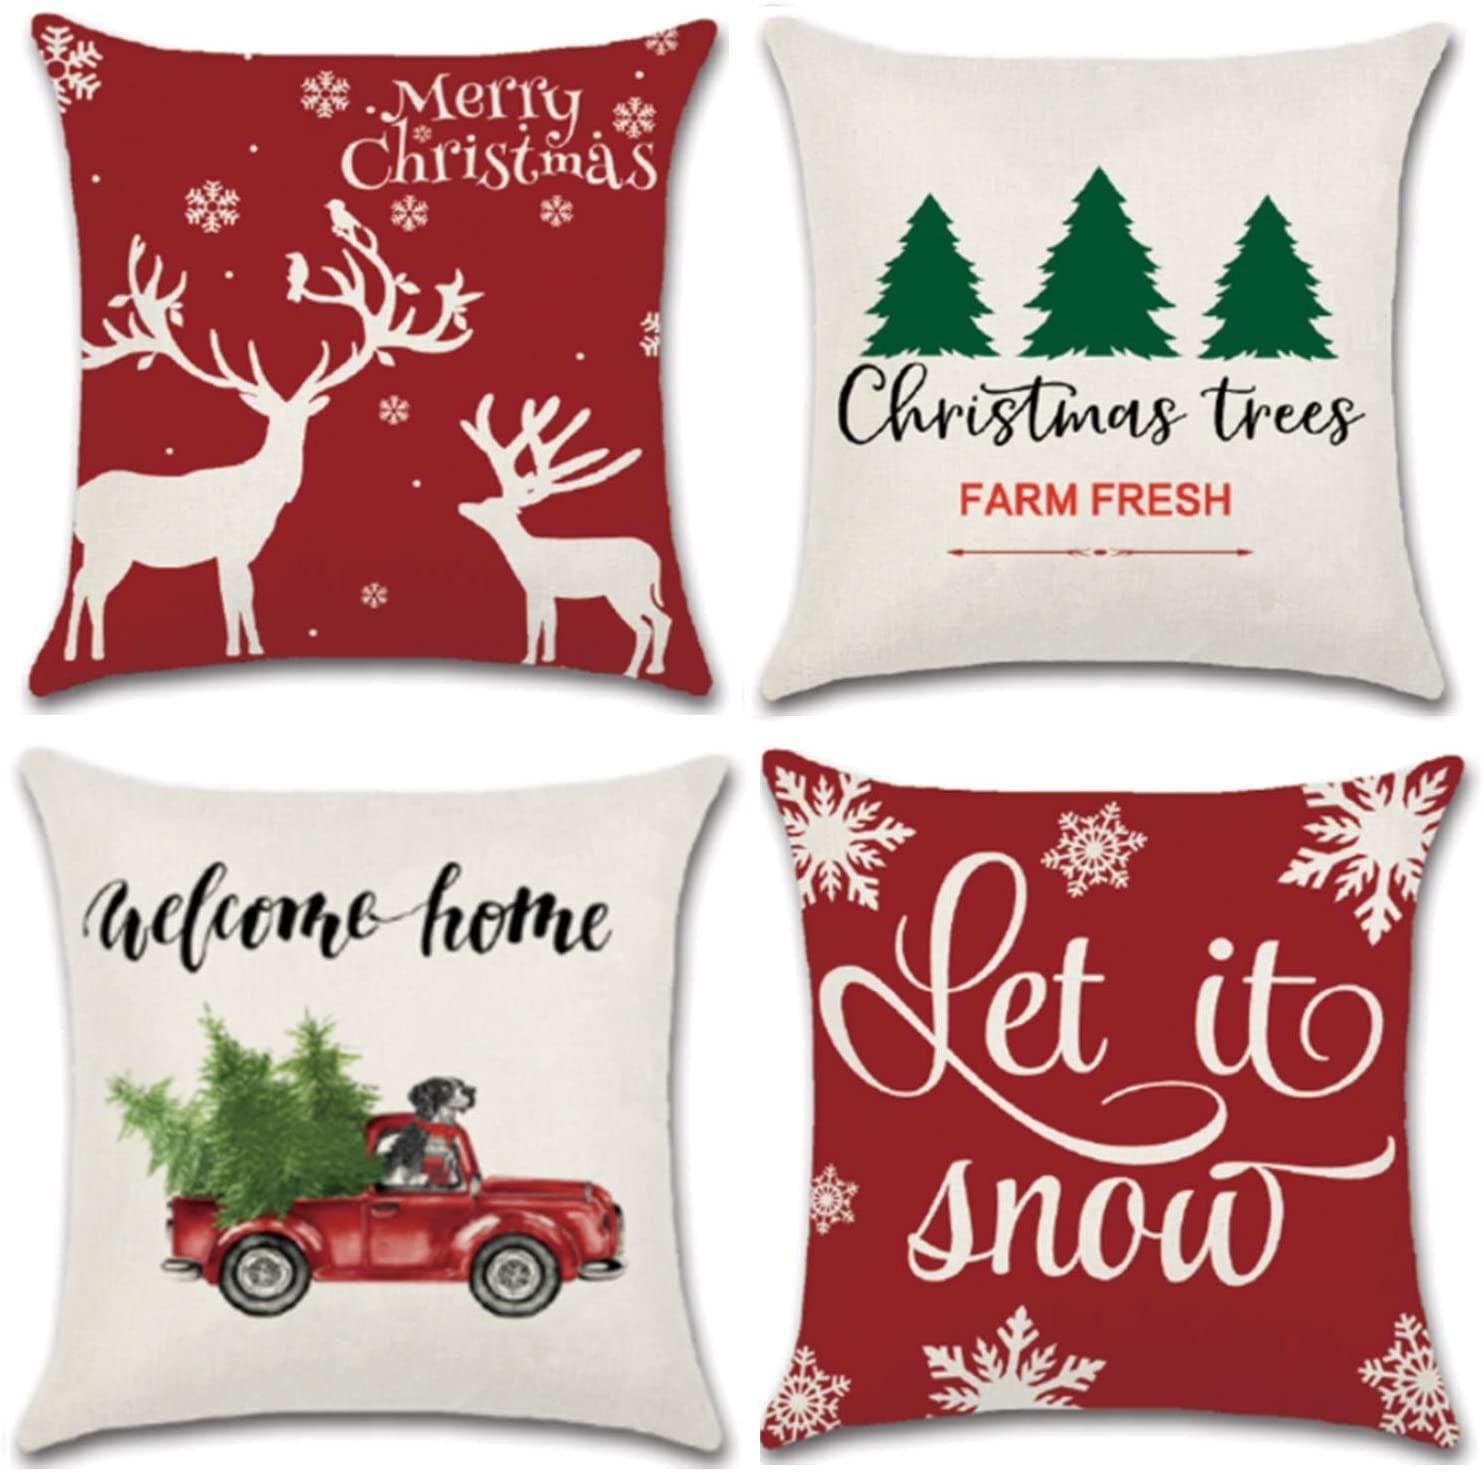 RED CHRISTMAS PILLOWS Red Decorative Throw Pillows Deer Red Holiday Throw Pillow Covers Reindeer Christmas Pillow Covers home decor